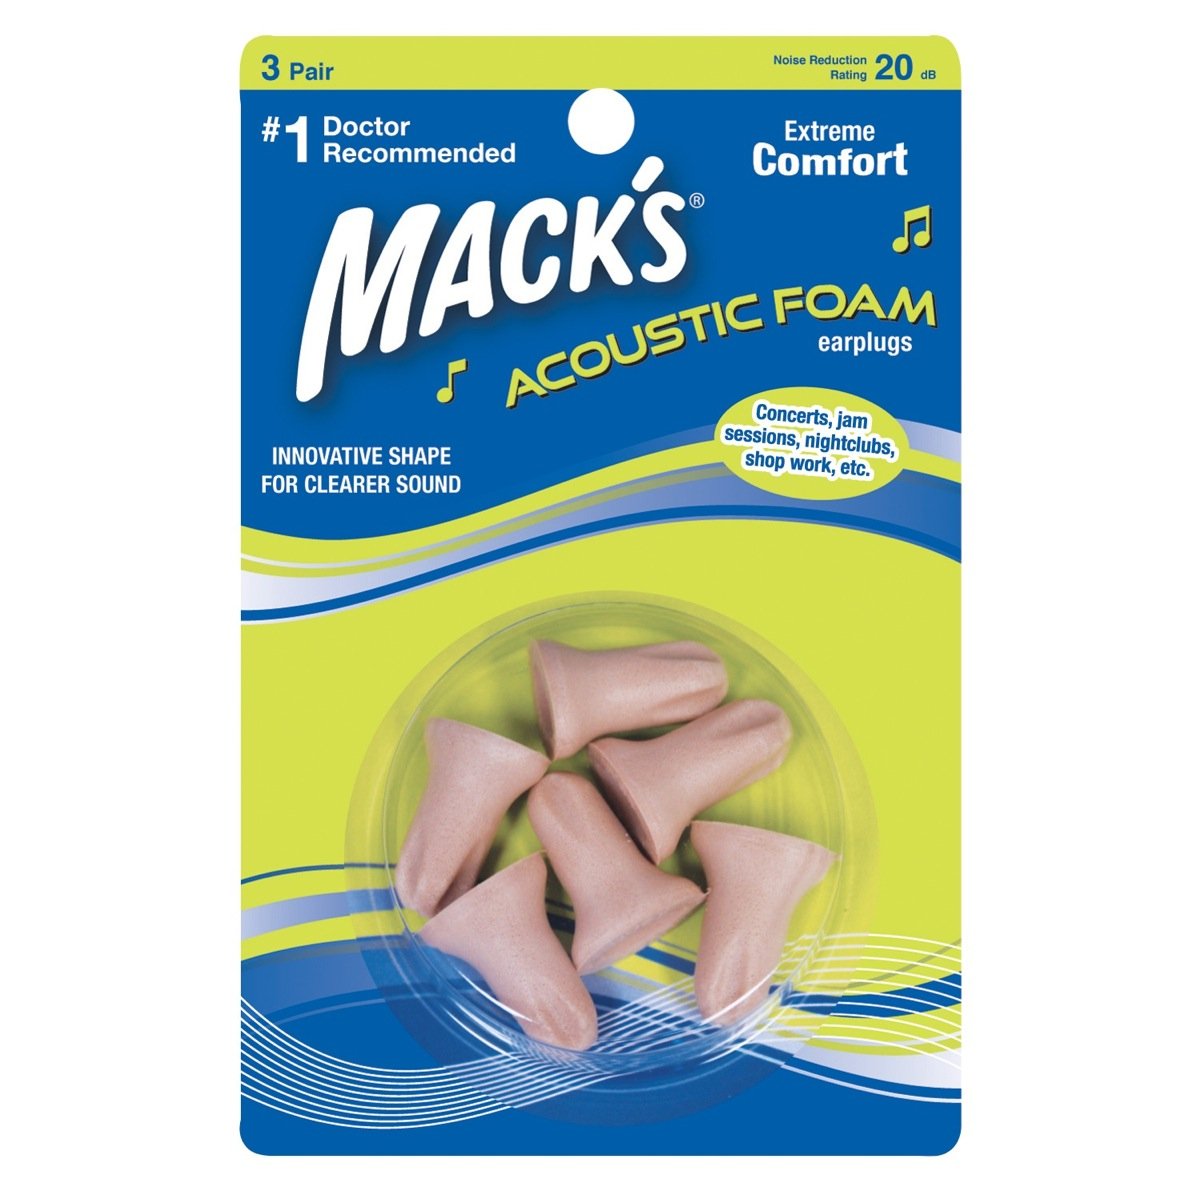 Made of soft, squishy foam, these ear plugs are a comfortable enough to wear at concerts, clubs, jam sessions, and even to sleep.